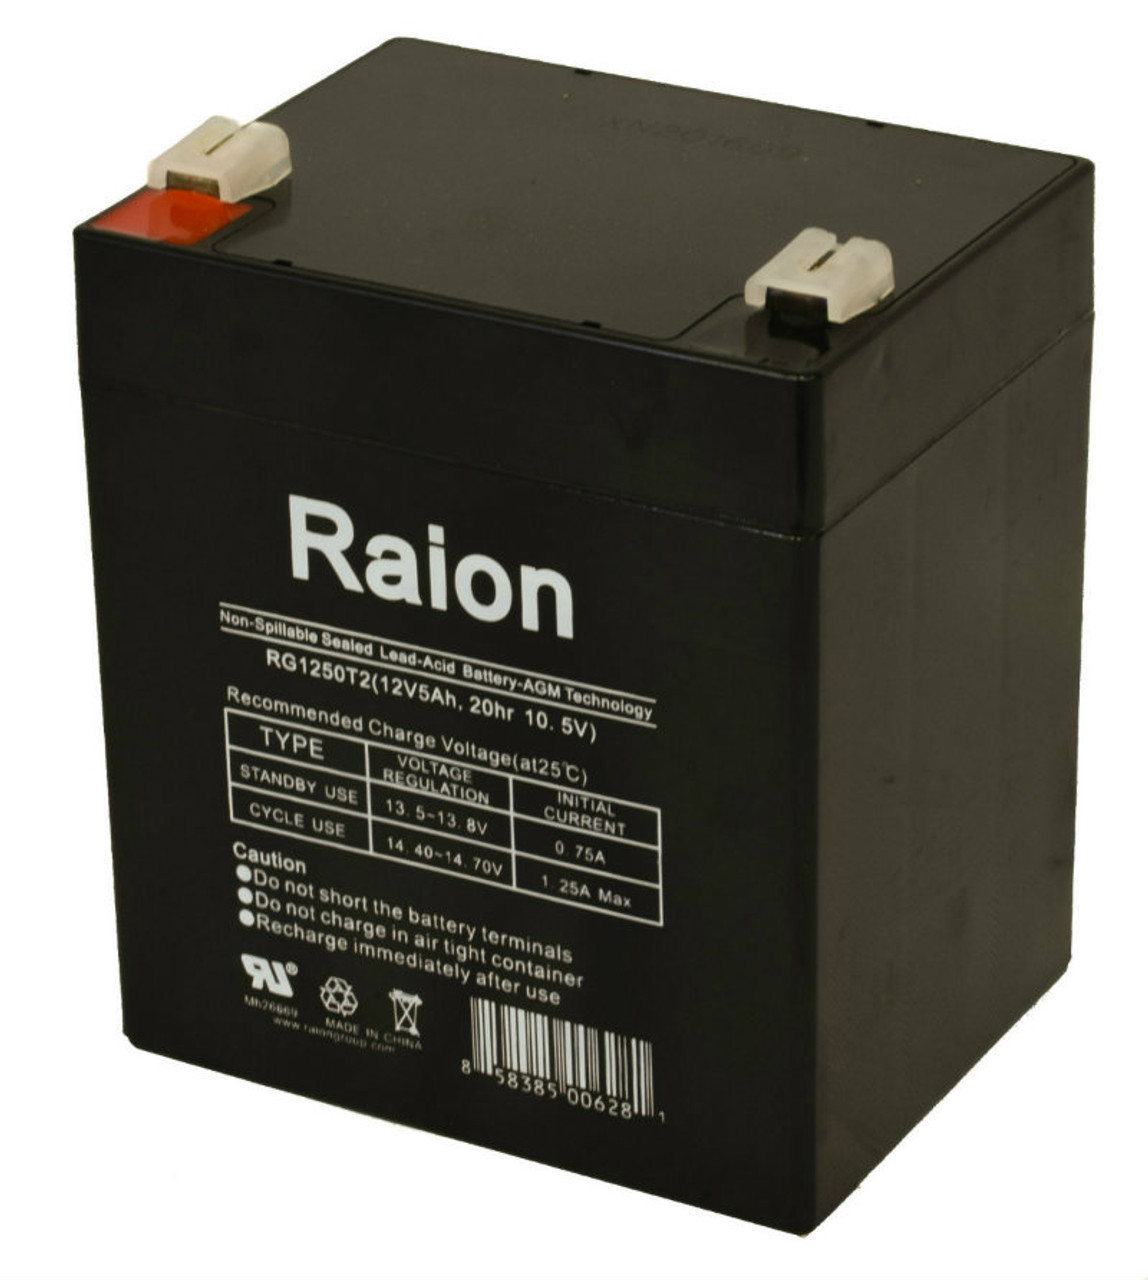 Raion Power RG1250T1 Replacement Battery for Zonne Energy FP1245